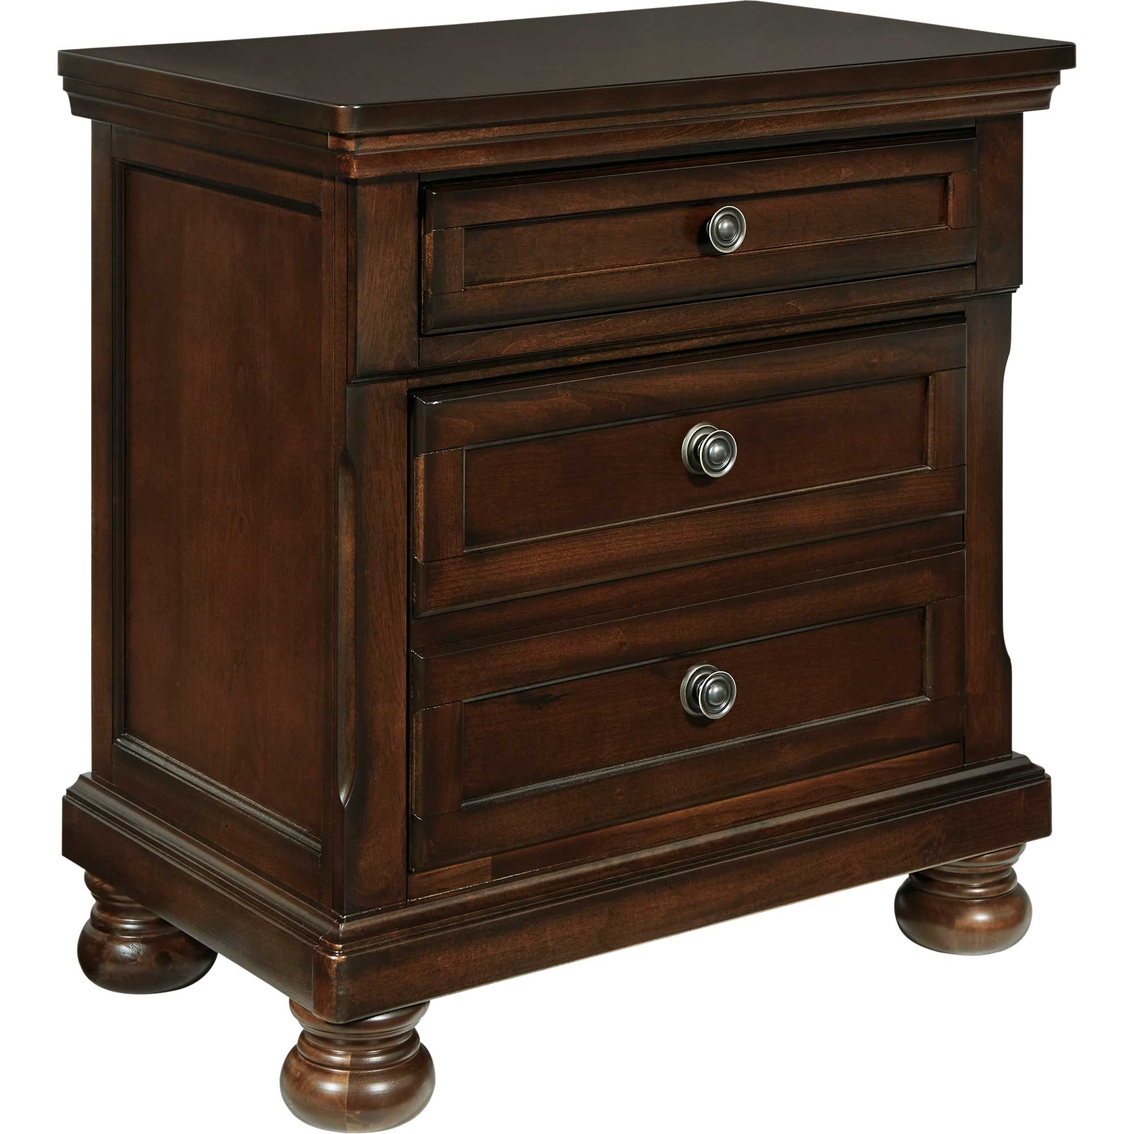 Signature Design by Ashley Porter Nightstand - Image 2 of 7